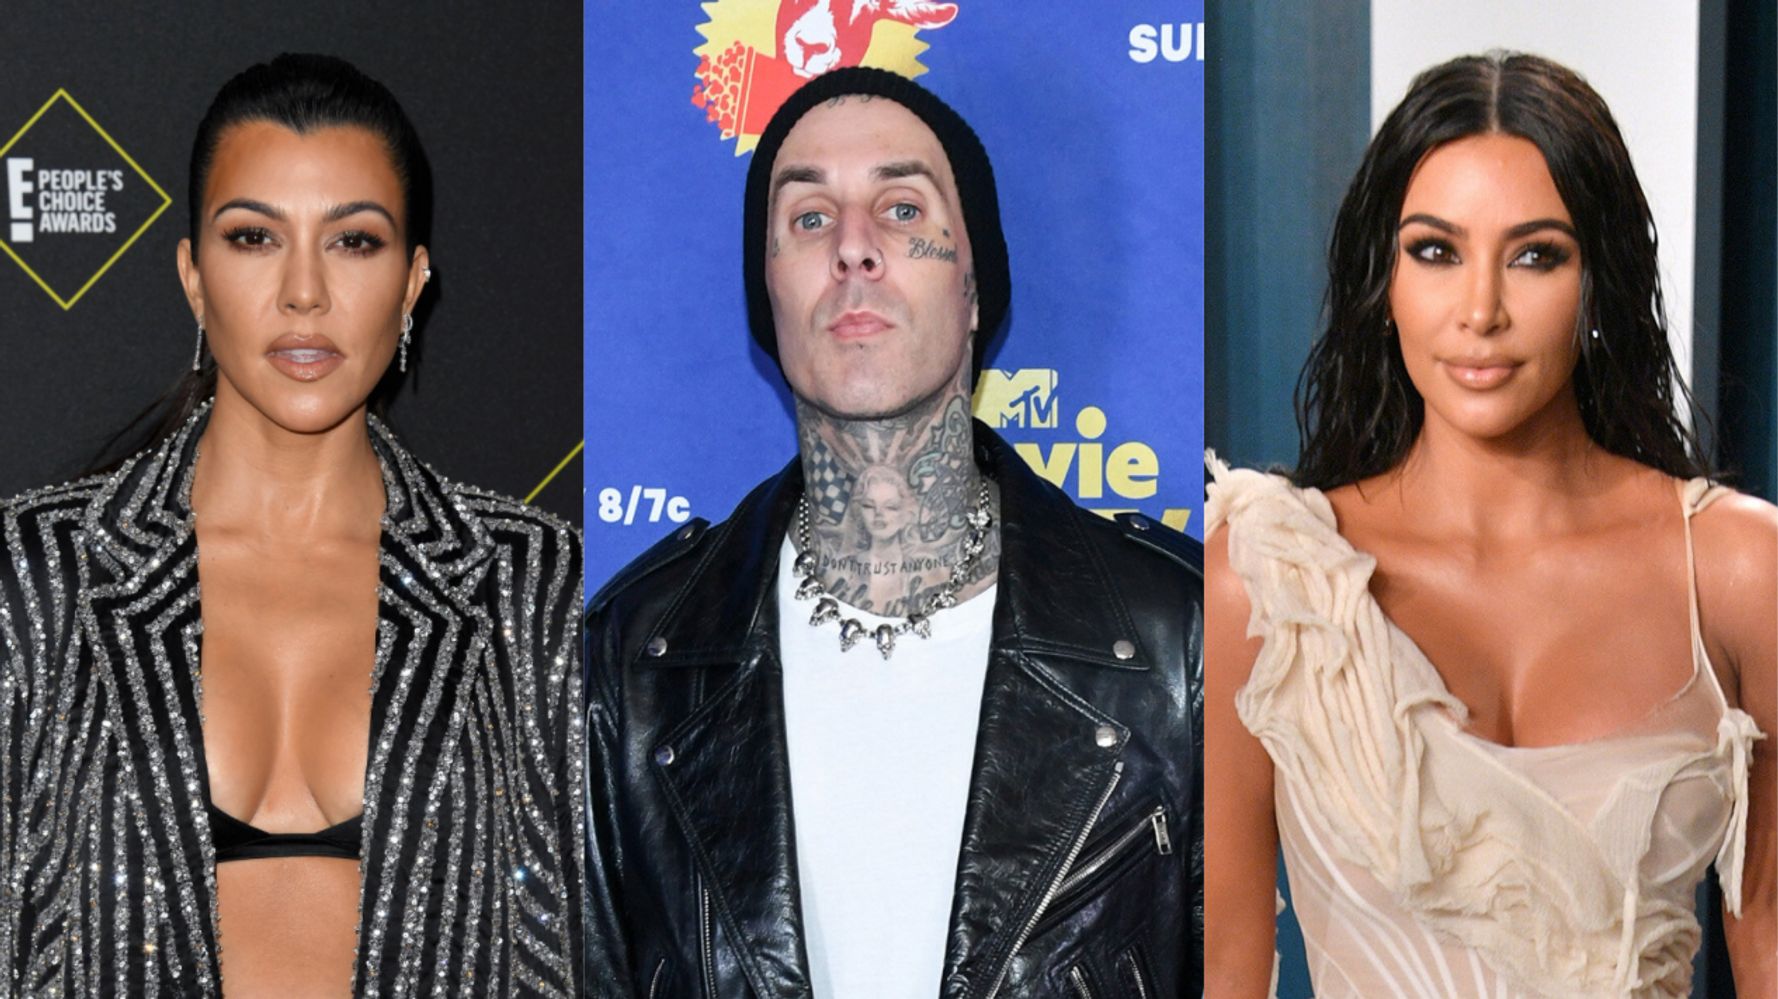 Try To Keep Up With The Rumor That Travis Barker Had An Affair With Kim Kardashian